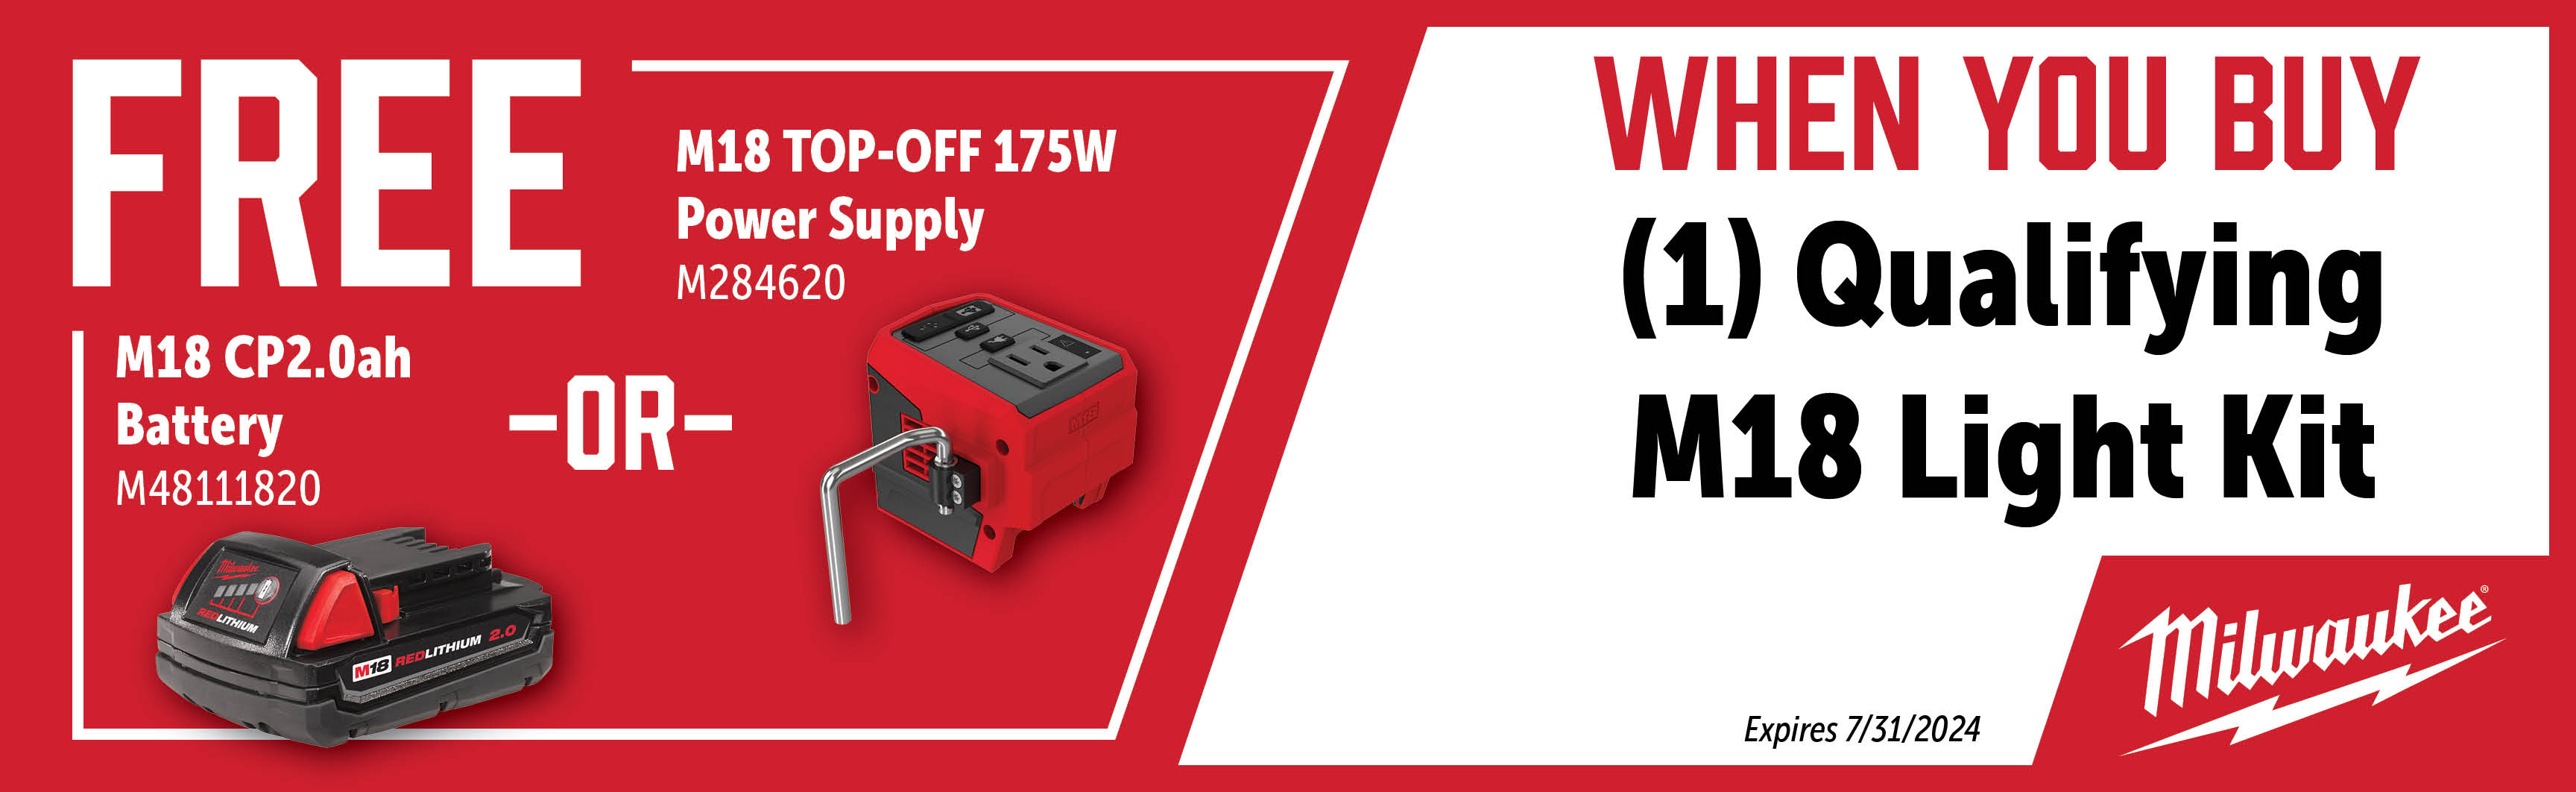 Milwaukee May - July: Buy a Qualifying M18 Light and Get a M284620 or M48111820